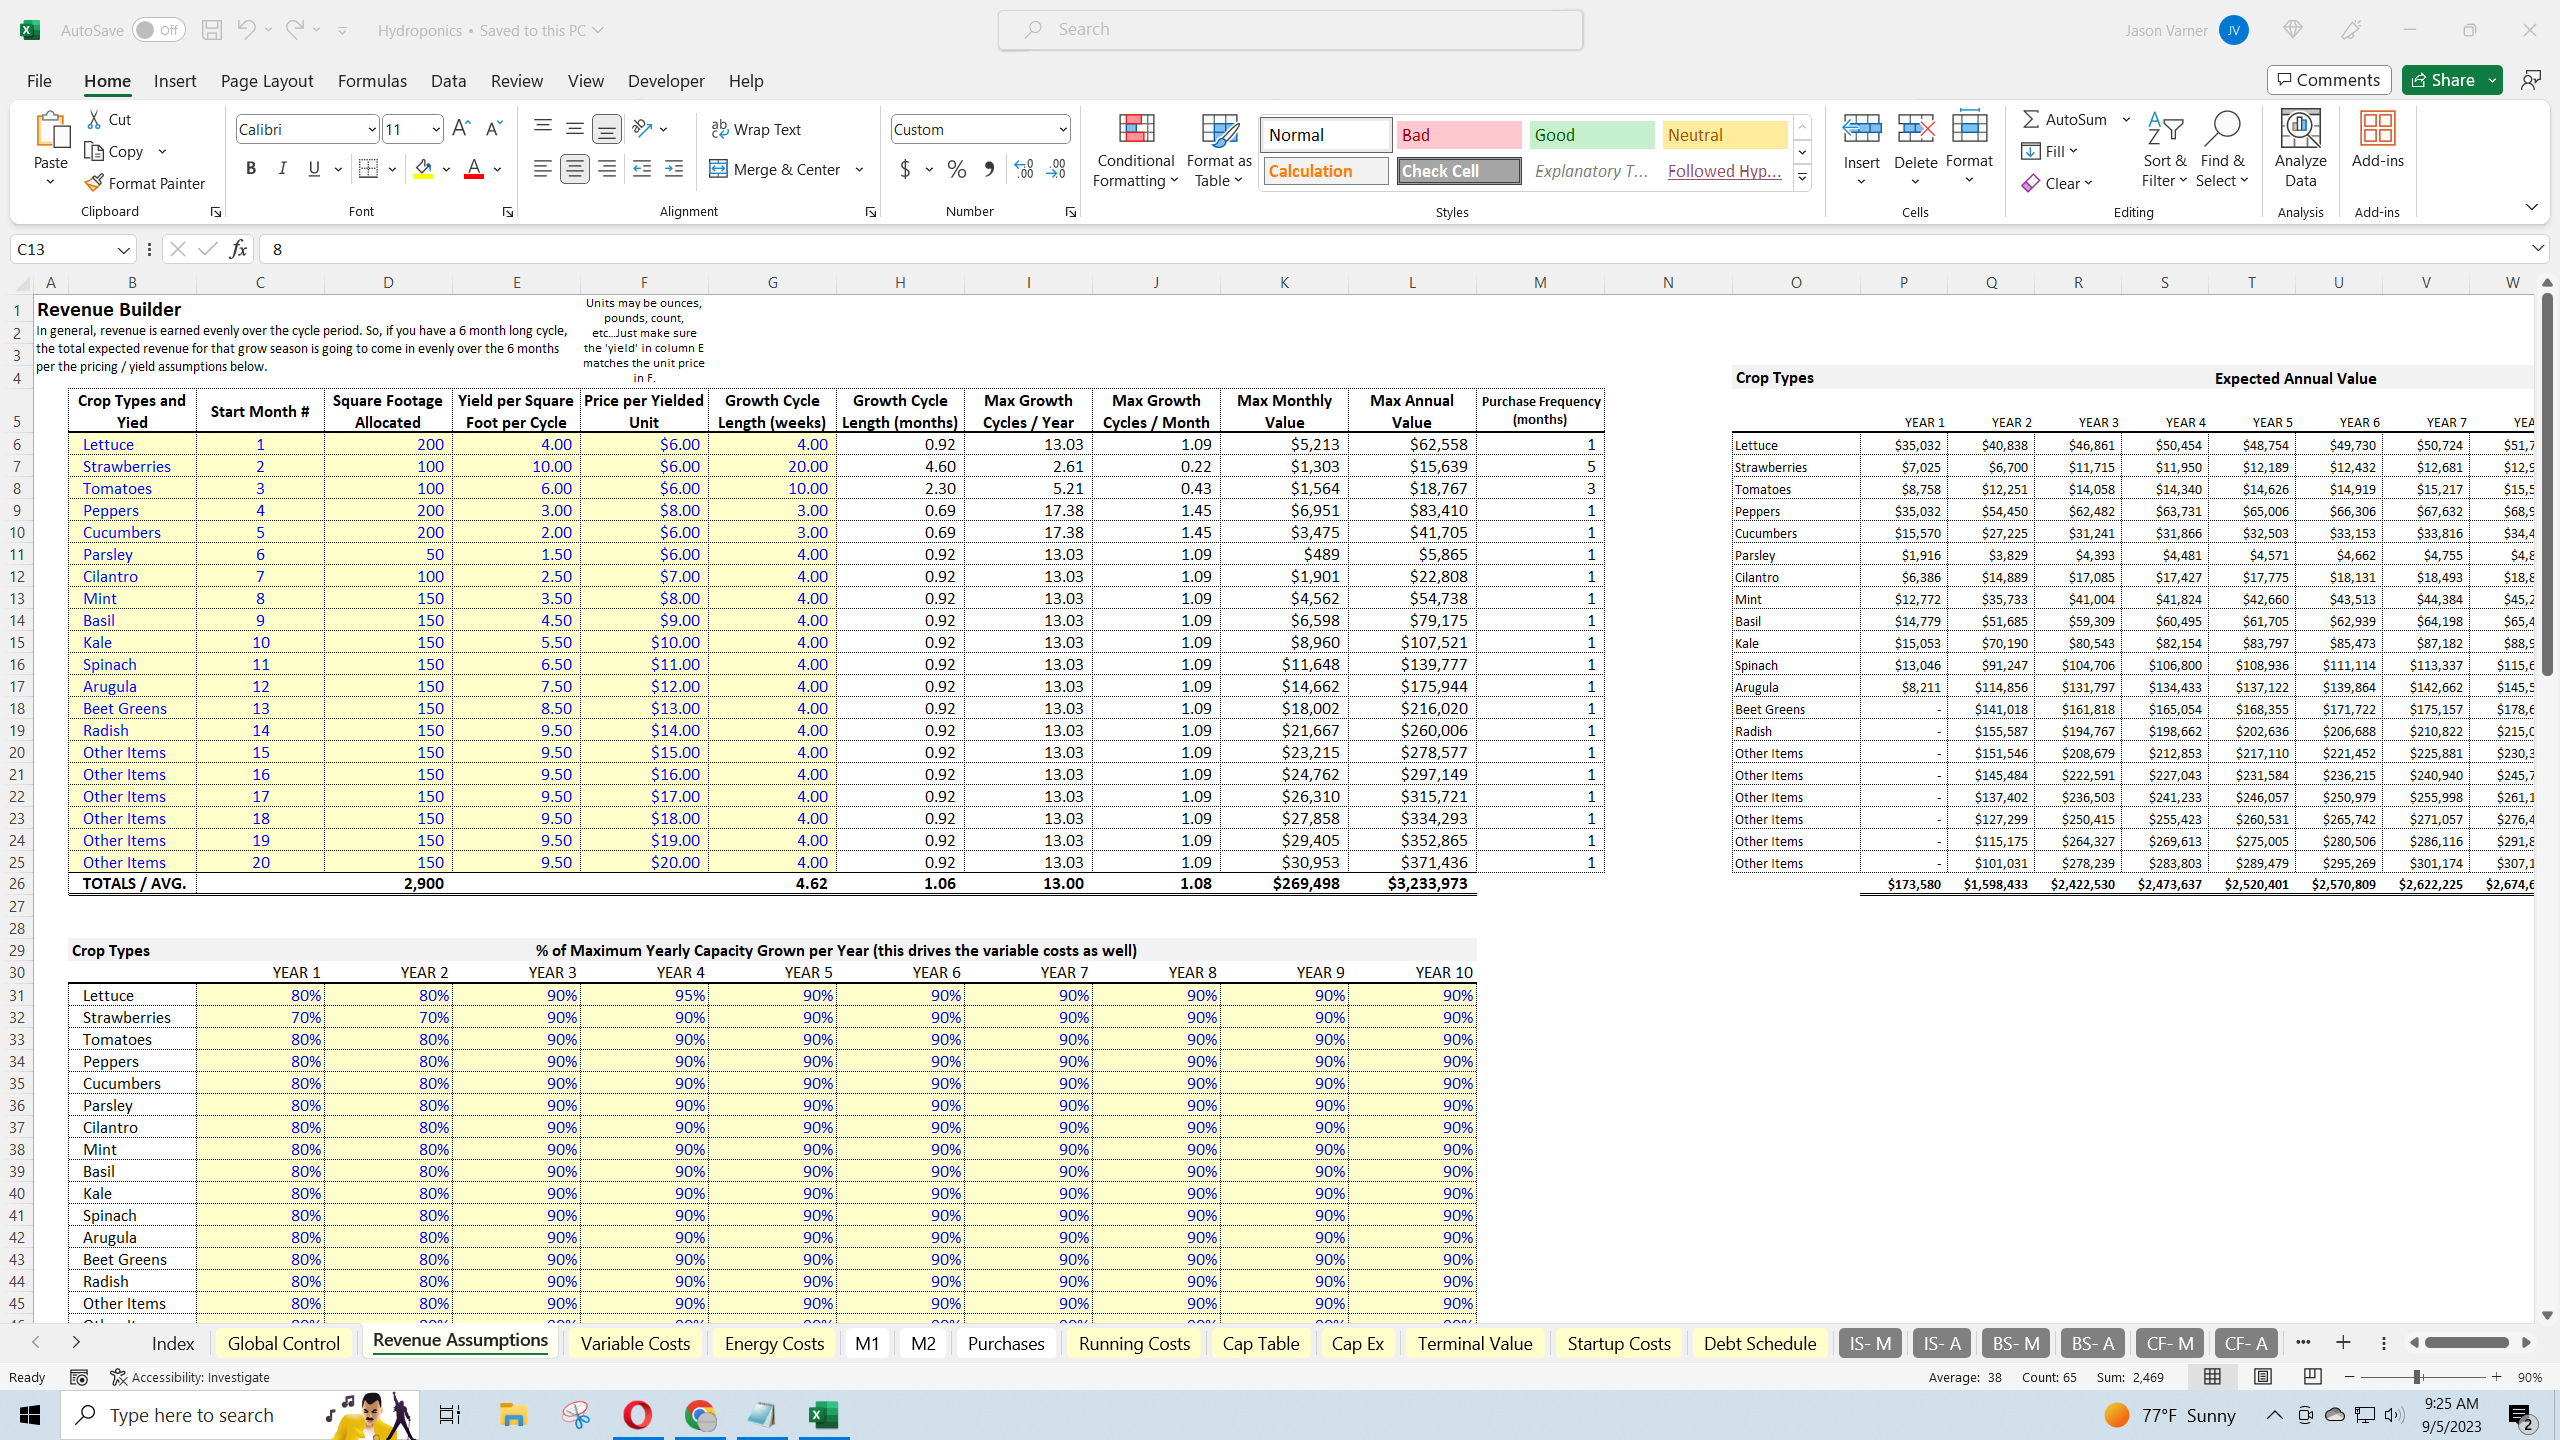 Hydroponics Business: 10 Year Financial Projection Template (Excel workbook (XLSX)) Preview Image